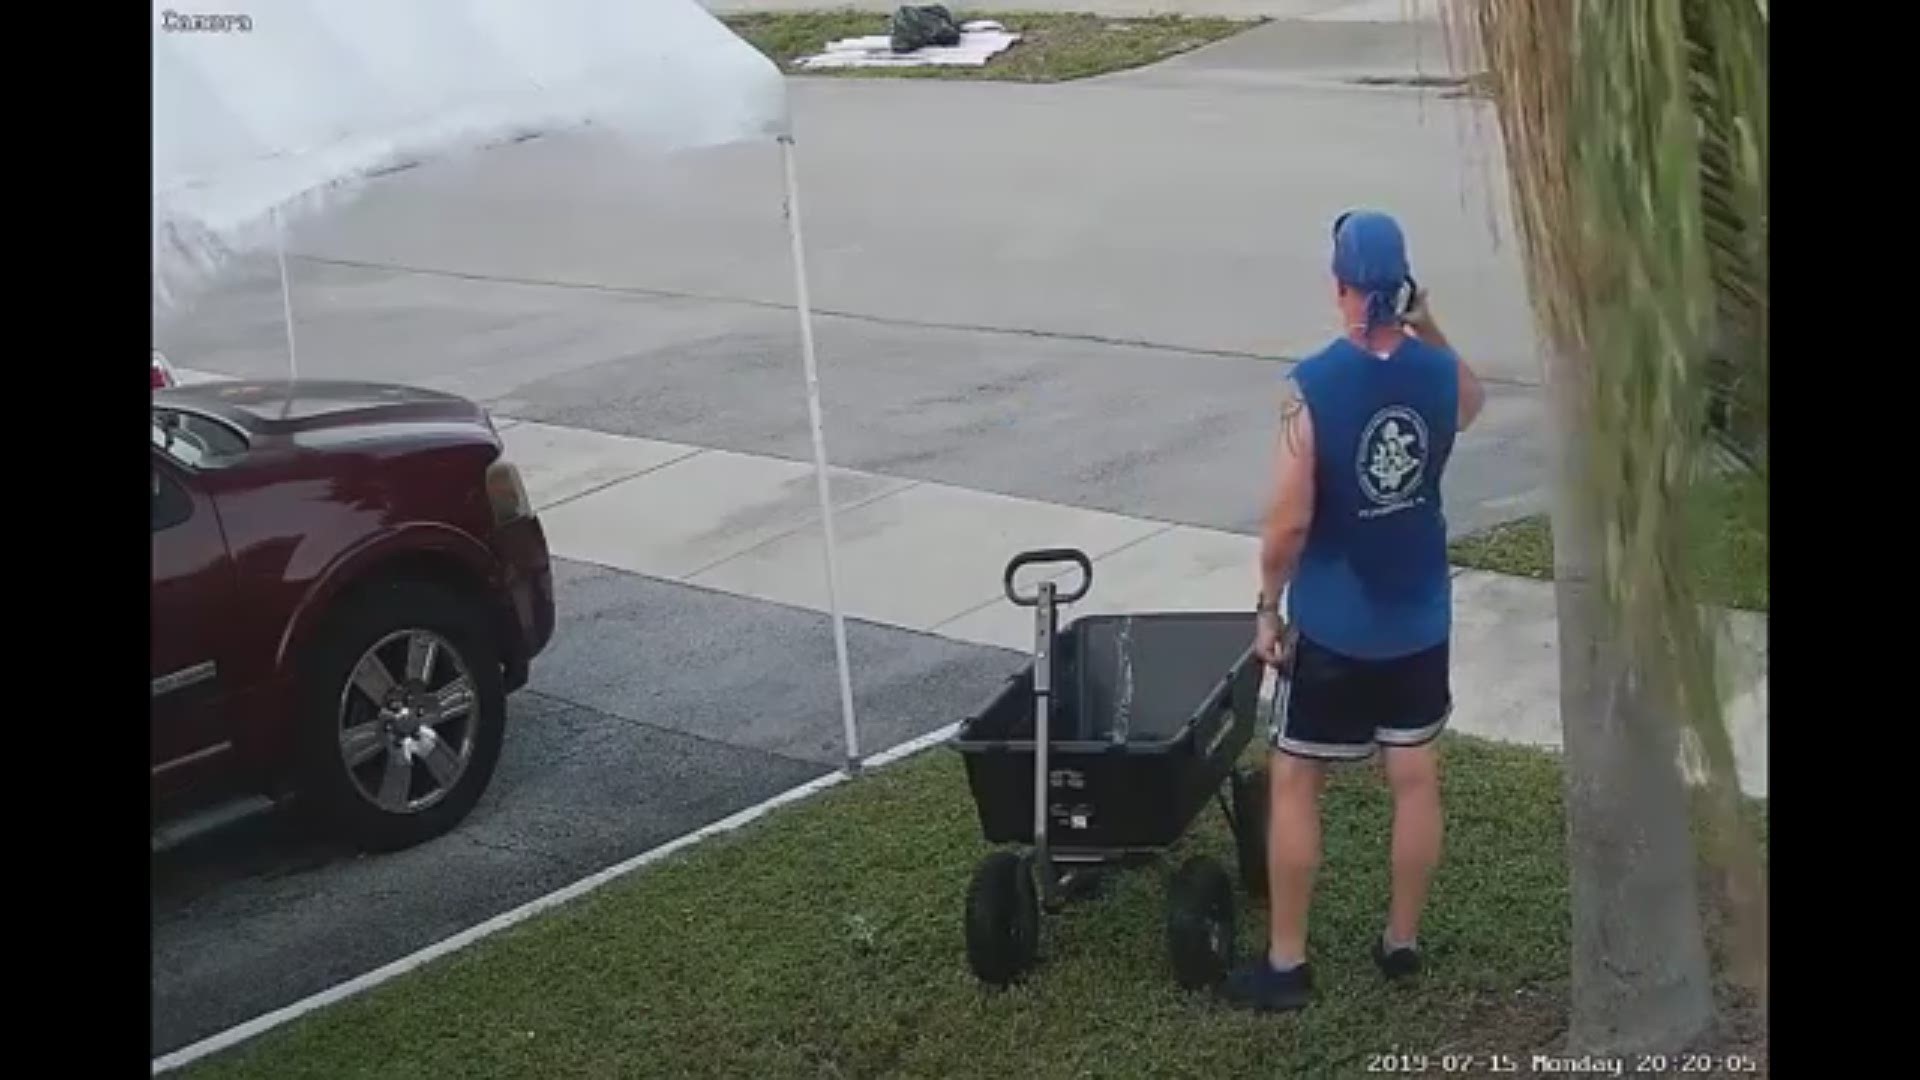 The Broward County Sheriff's Office says a jogger and another man in Oakland Park argued over who could keep a heavy-duty cart found in a trash pile, and their argument caused the second man to begin swinging a sword. Now, that second man is wanted by the cops.